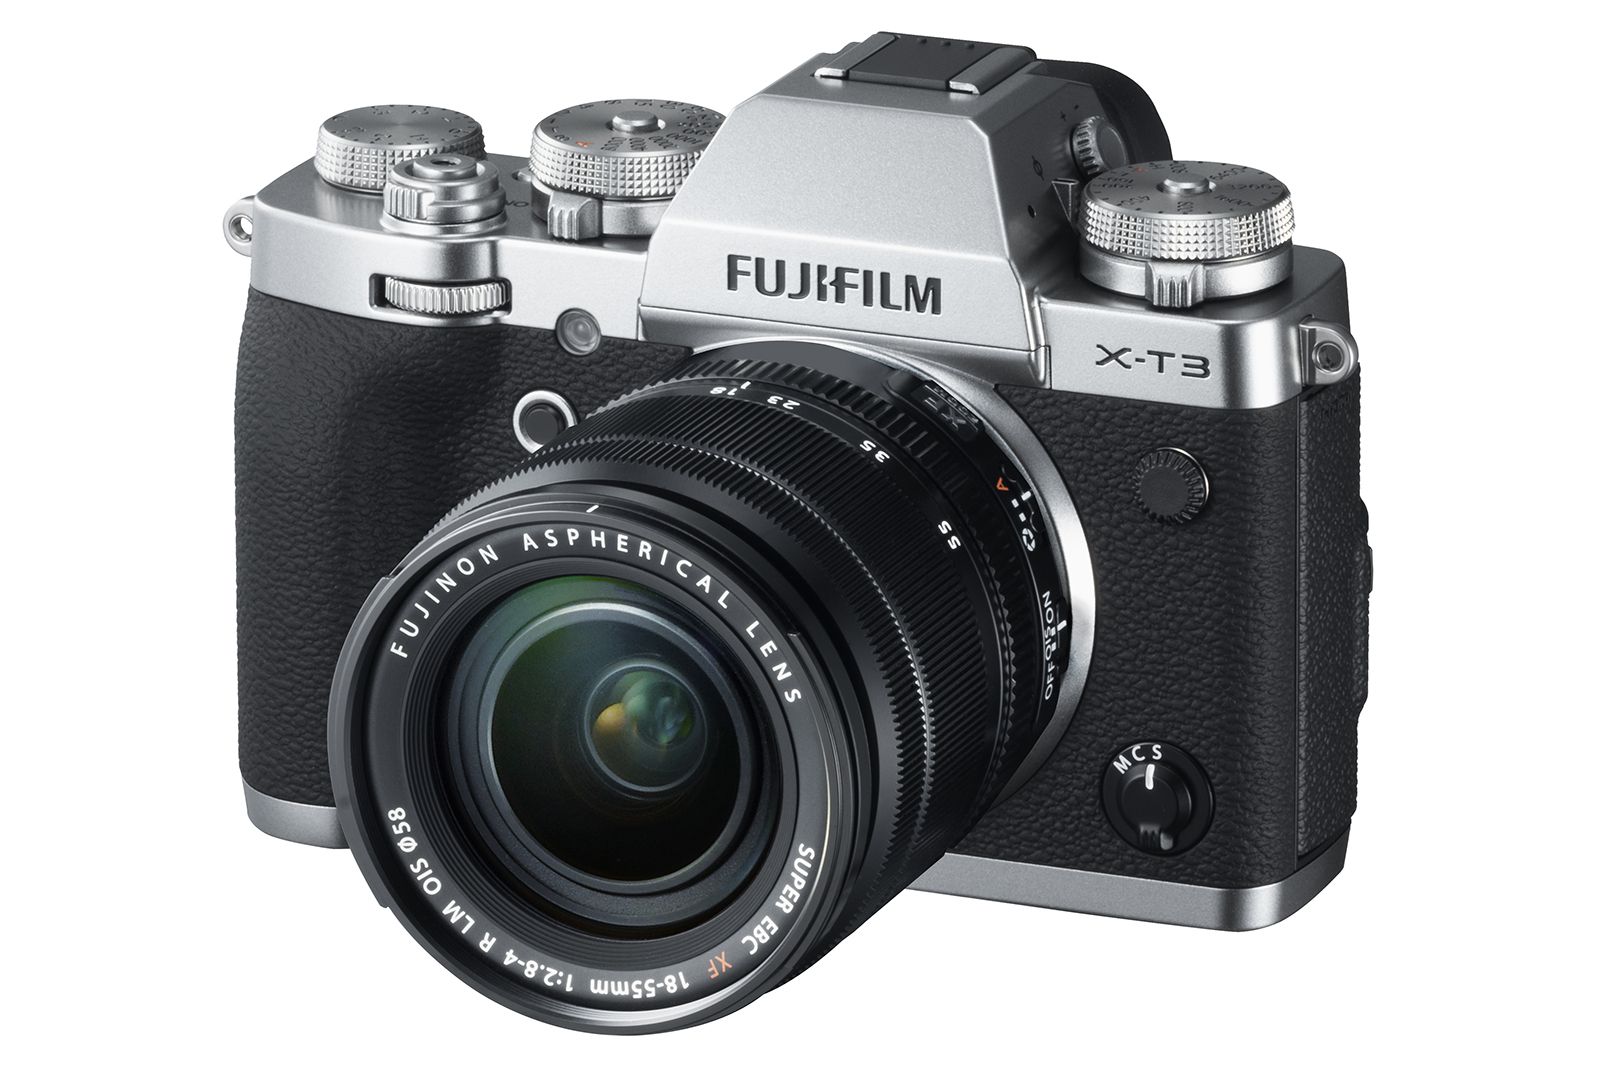 Fujifilm X-T3 is first APS-C mirrorless camera with 4K 60fps video recording image 1